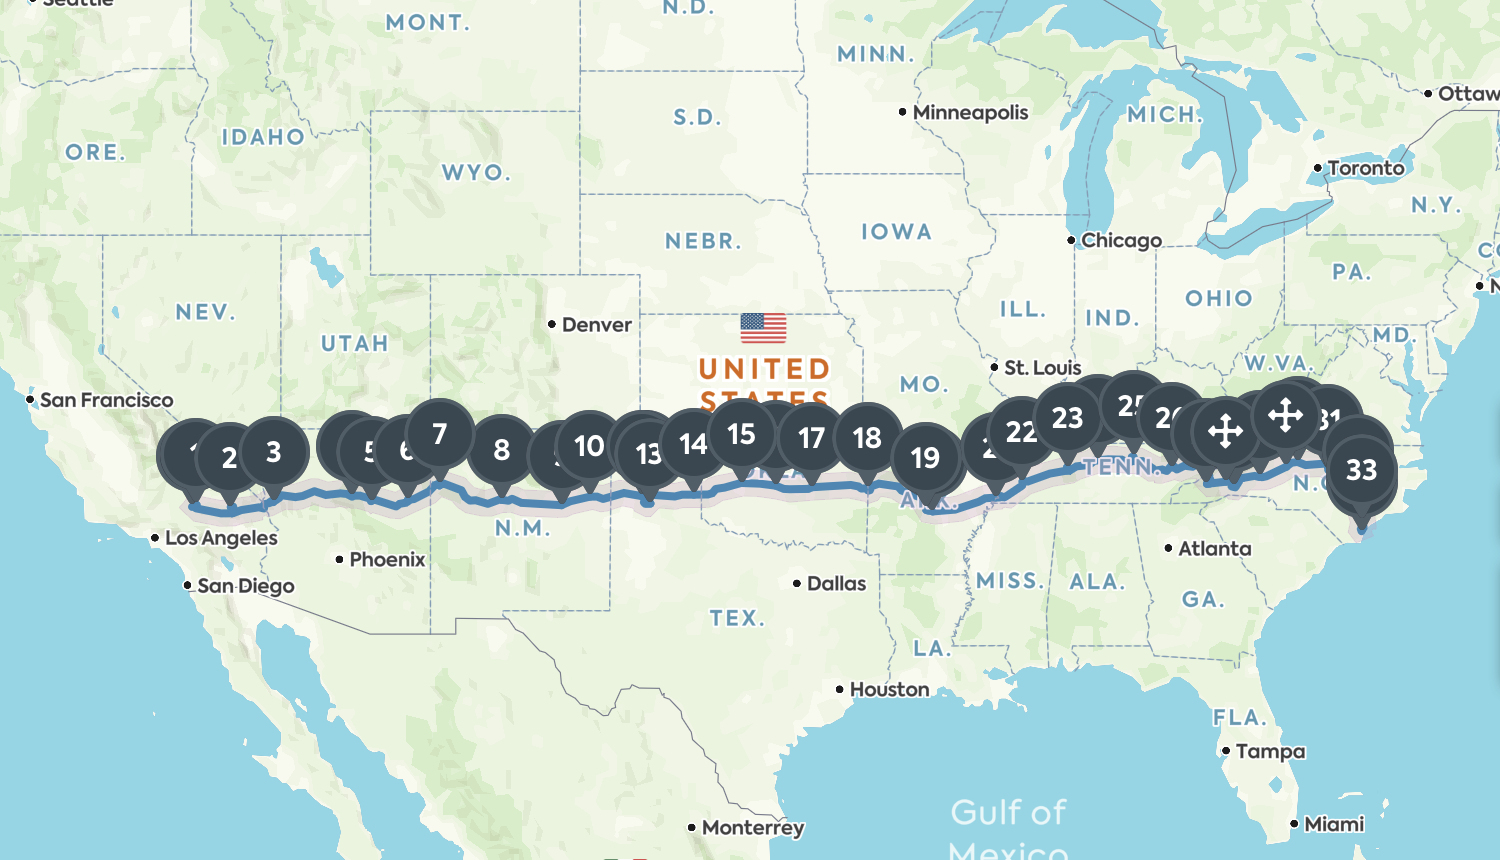 All Of The Cool Stops And Attractions On I-40 | Roadtrippers - Map Of I 40 In Texas